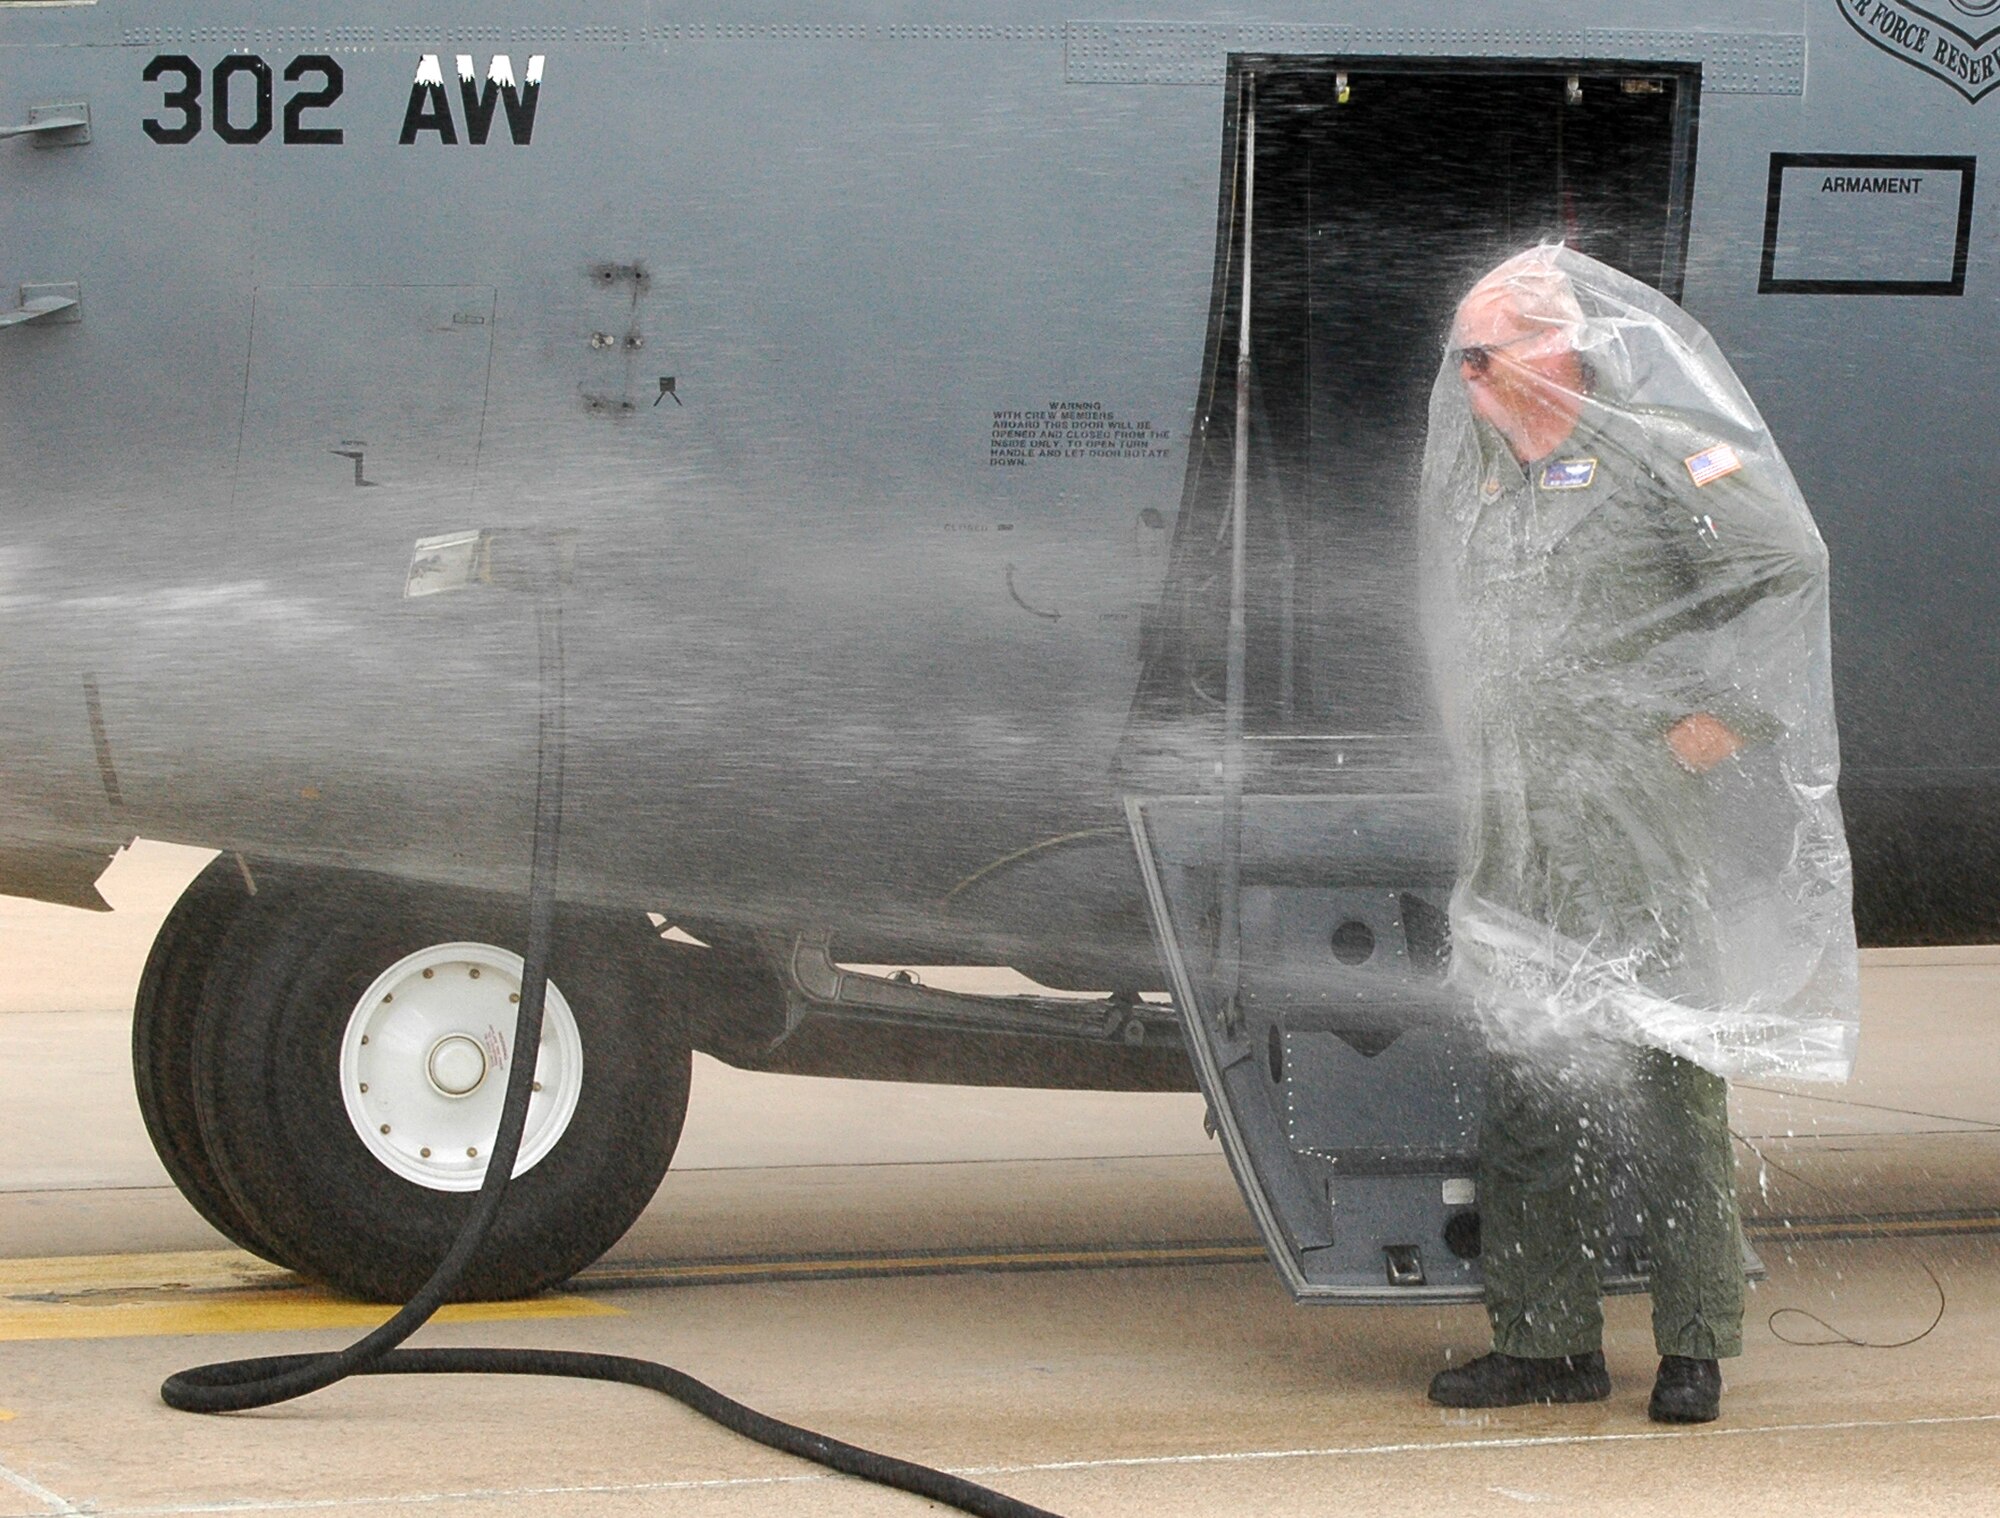 Col. Bob Chapman stands tall in the face of a congratulatory water spray while protecting himself with a plastic chemical bag Aug. 8 at Peterson Air Force Base, Colo. The colonel's spraying, a tradition conducted when a pilot has his or her final flight with the unit they're assigned to, culminated his flying career with the Air Force Reserve's 302nd Airlift Wing.  The flight capped off his military flying career with more than 5,200 hours of flight, including over combat zones. Colonel Chapman, who relinquished his position as the wing's vice commander during the August unit training assembly, has served in the Air Force since 1978 when he joined as an enlisted member. The colonel left Active Duty in 1992, becoming an Air Force Reserve member with the 302nd AW. The colonel is projected to retire in March 2011. (U.S. Air Force photo/Maj. Kallece Quinn)